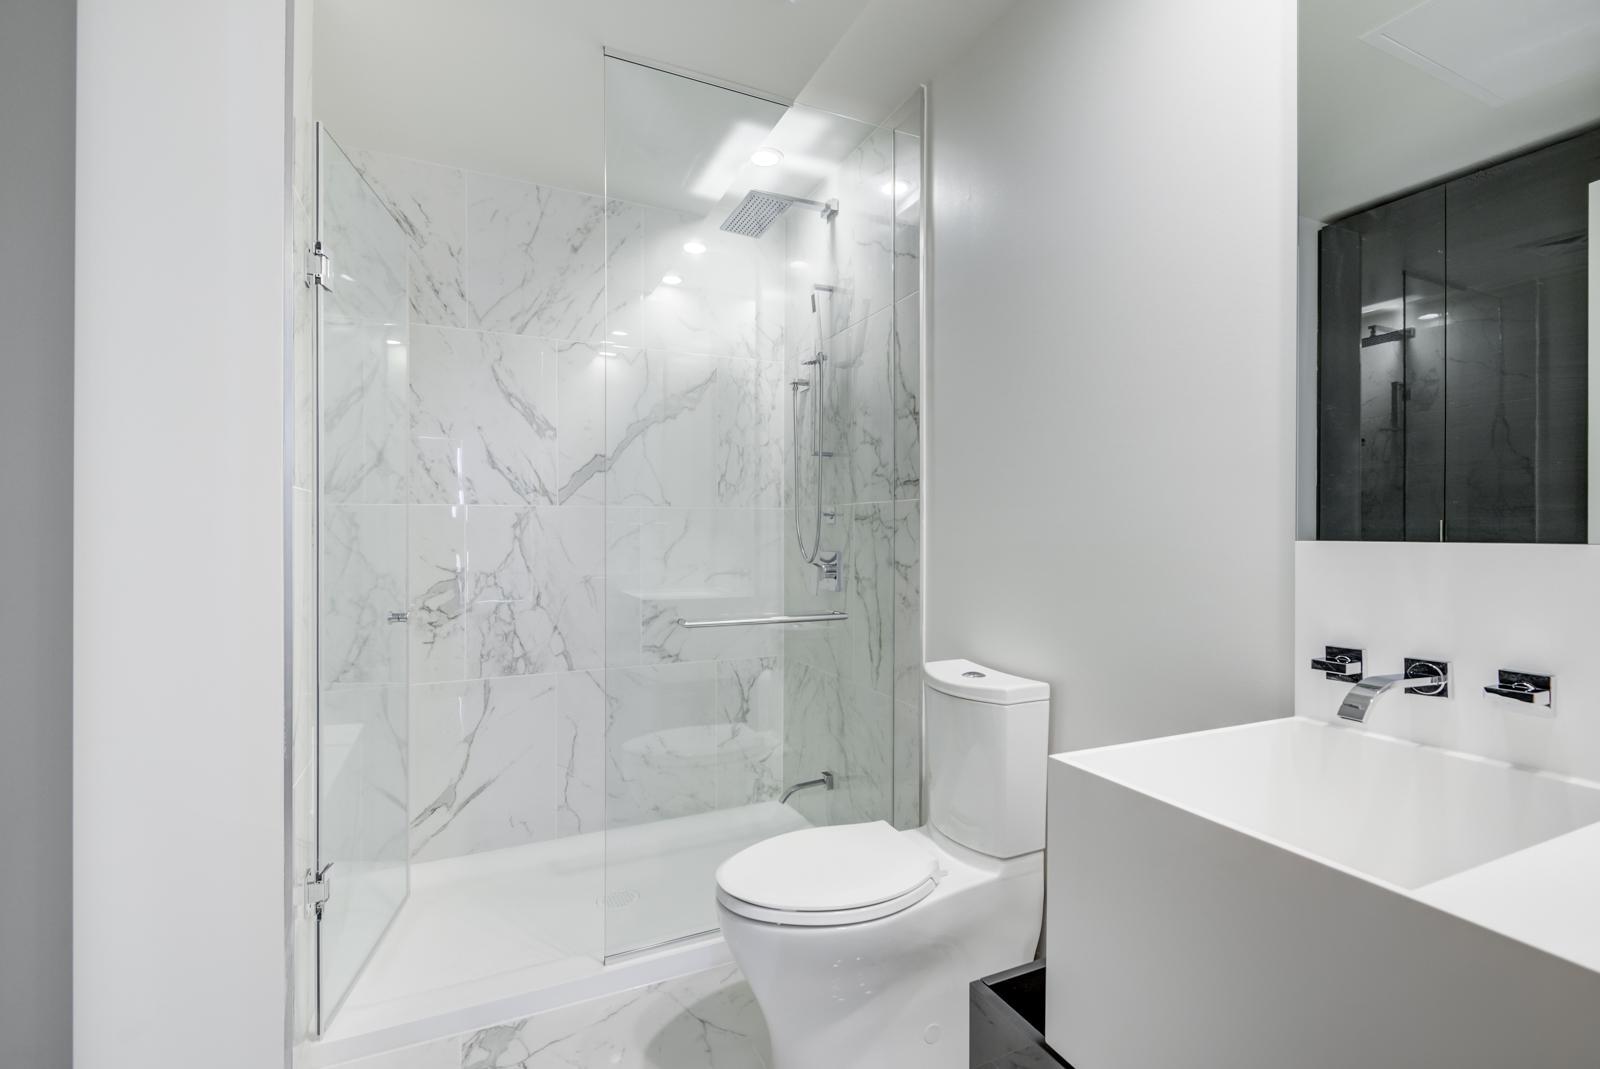 Highlights include a large sink, wall-mounted faucet, tall mirror, and frameless walk-in shower.